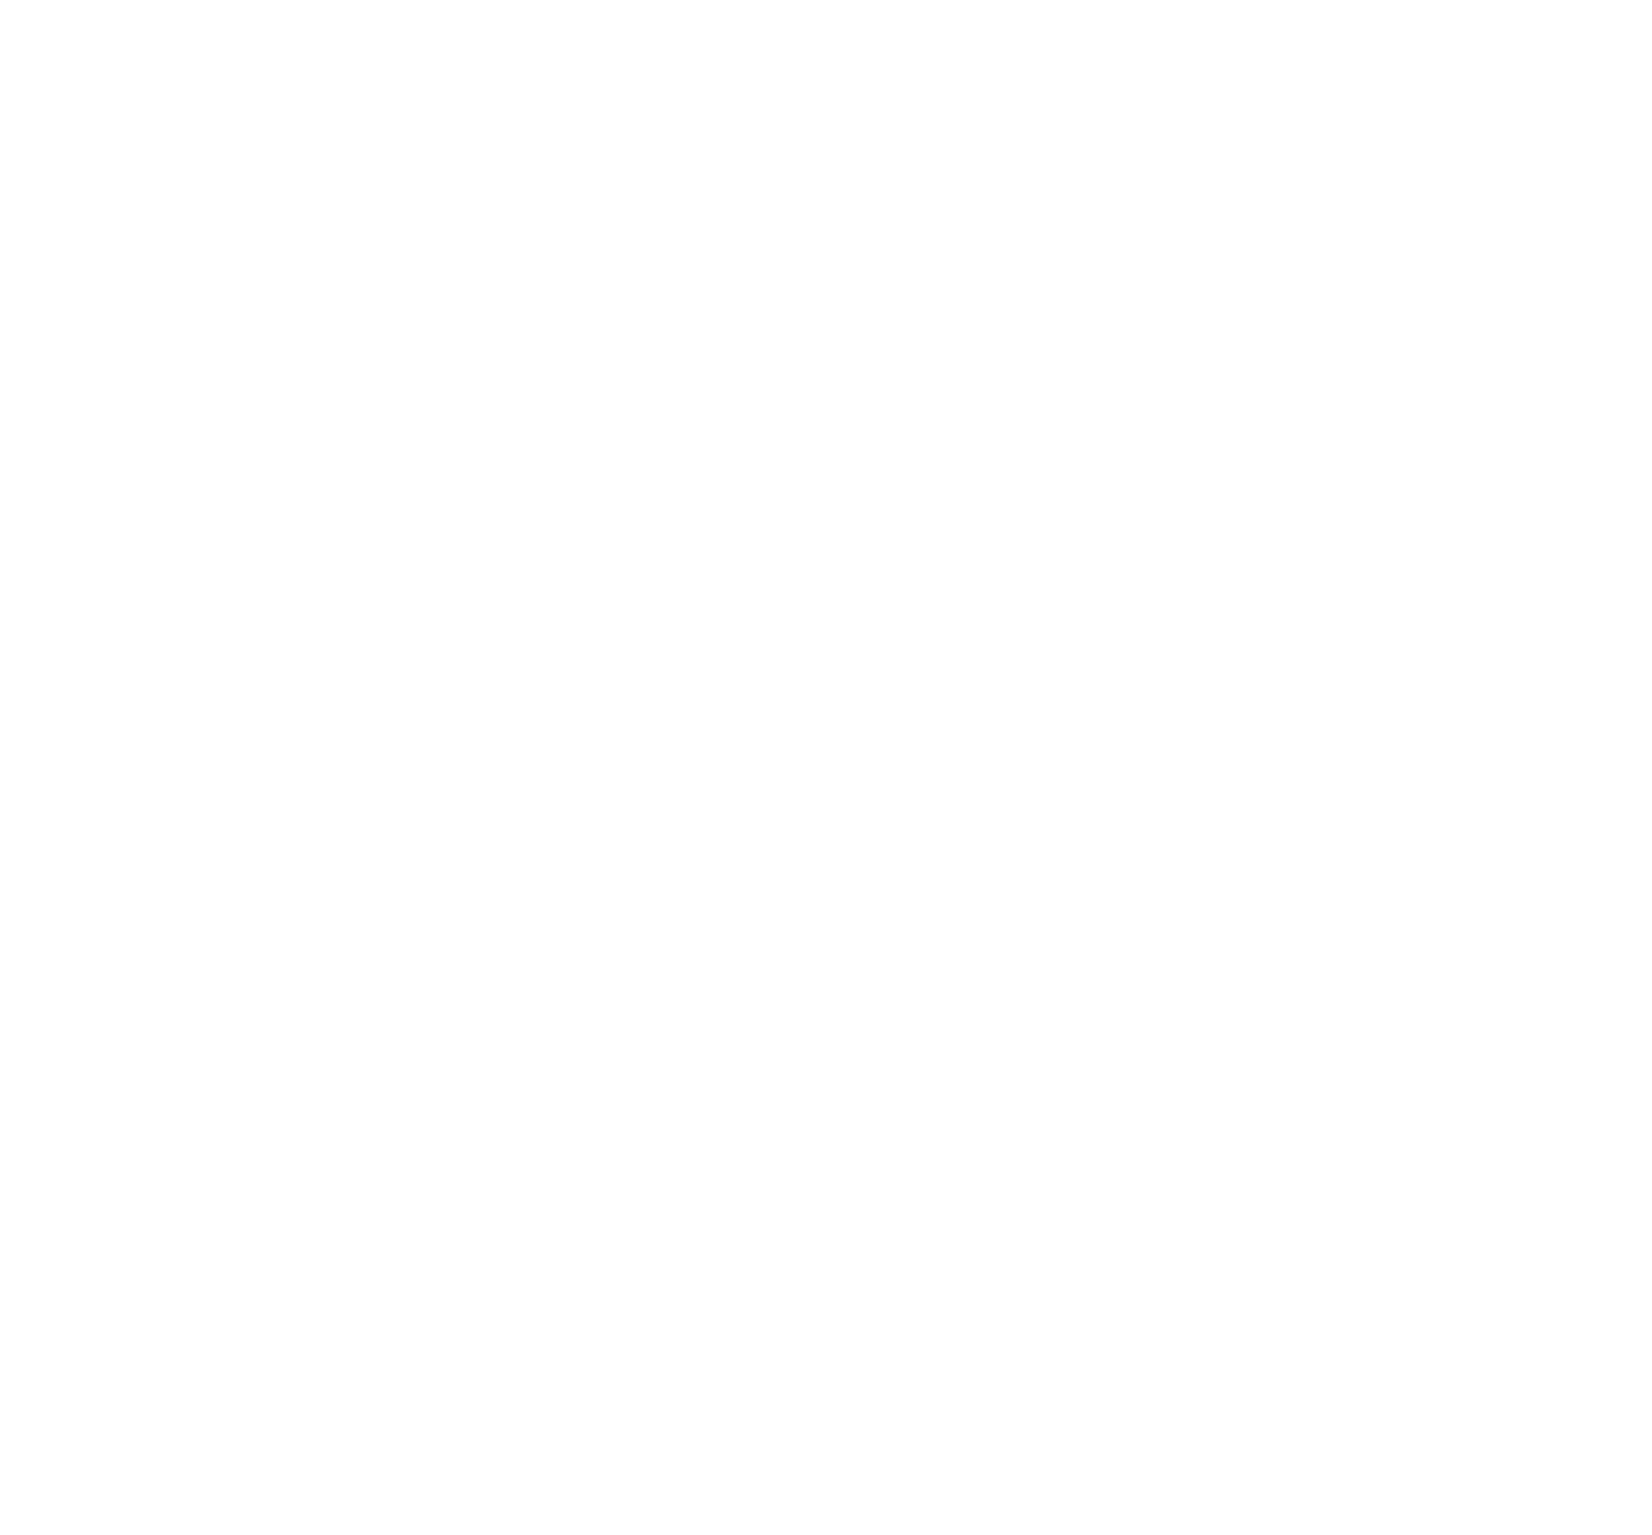 Wine Country Lane at Heart of the Rogue Festival in Medford, Oregon